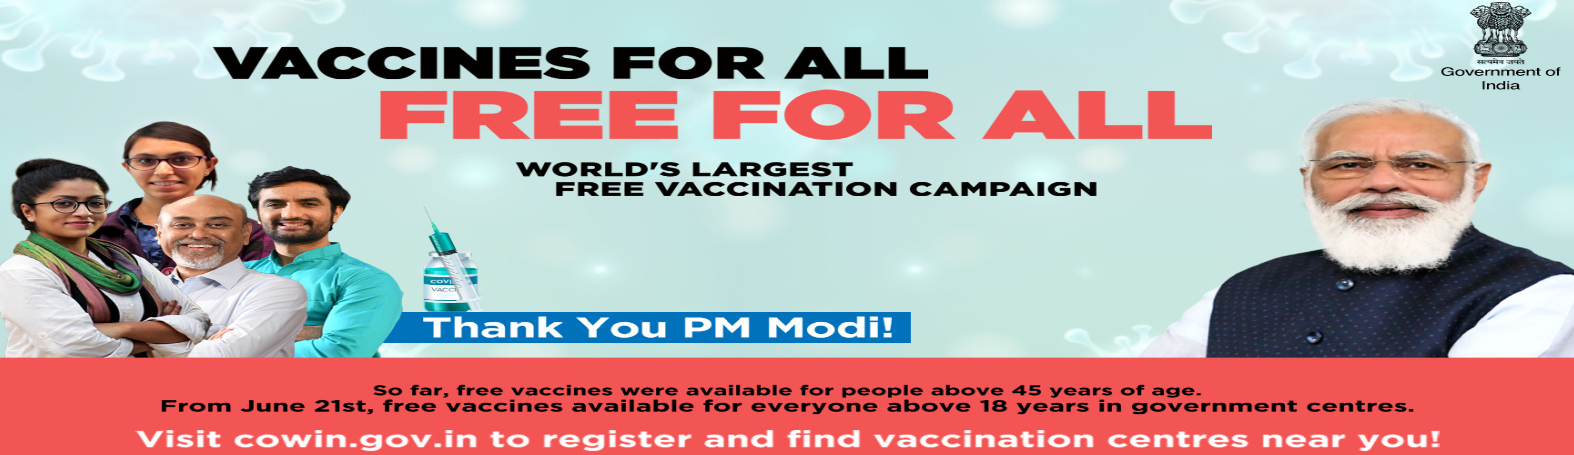 Image of free vaccination for all